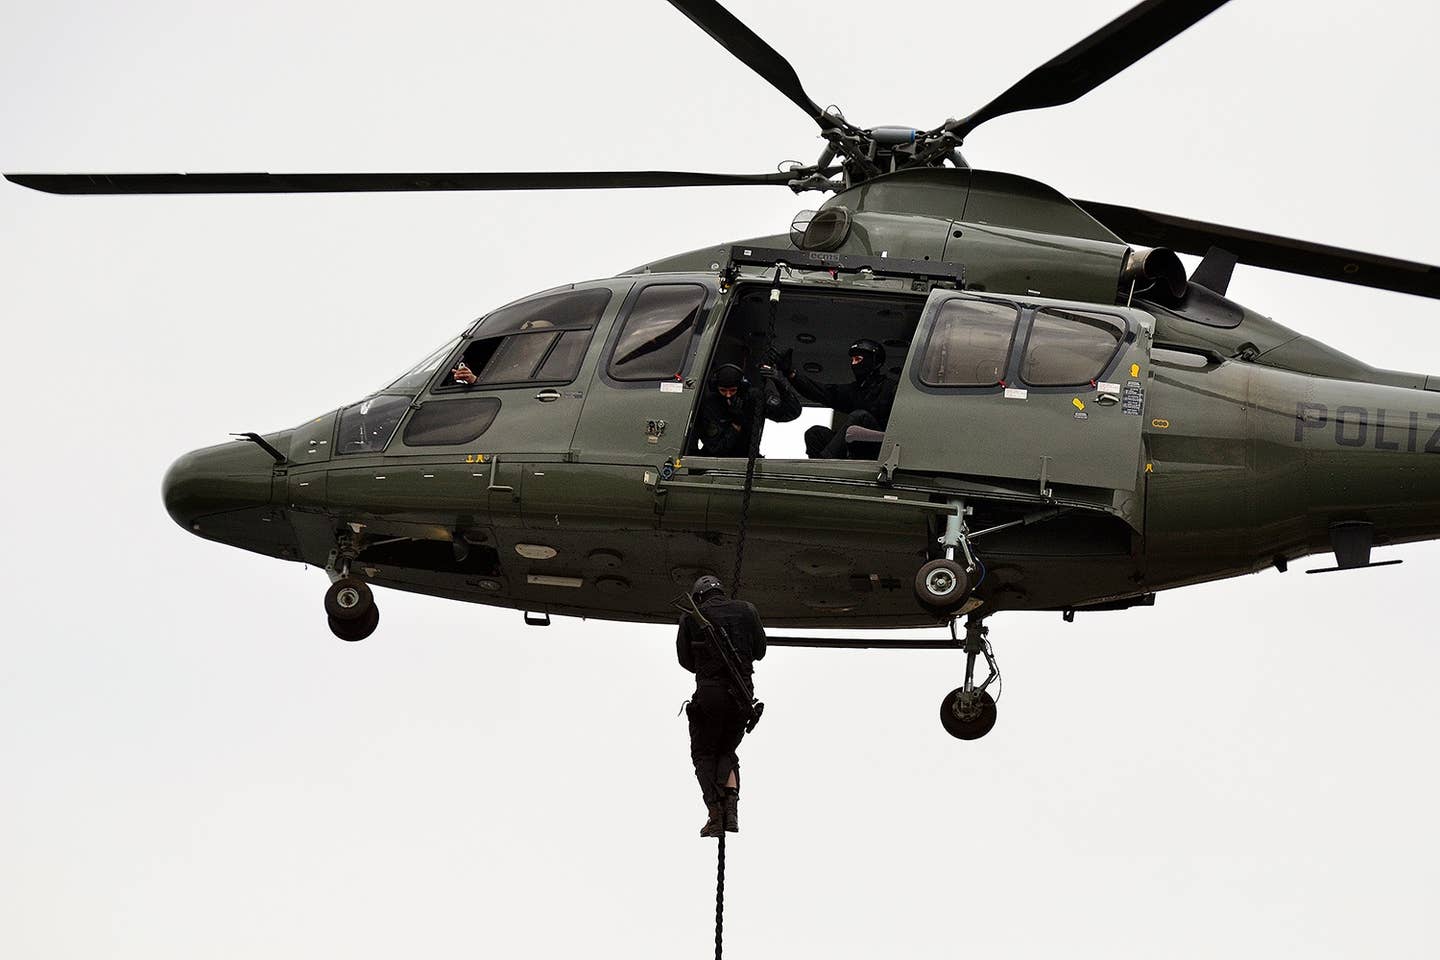 An SEK operative fast-ropes from a police helicopter during a demonstration (Photo Wikimedia Commons)